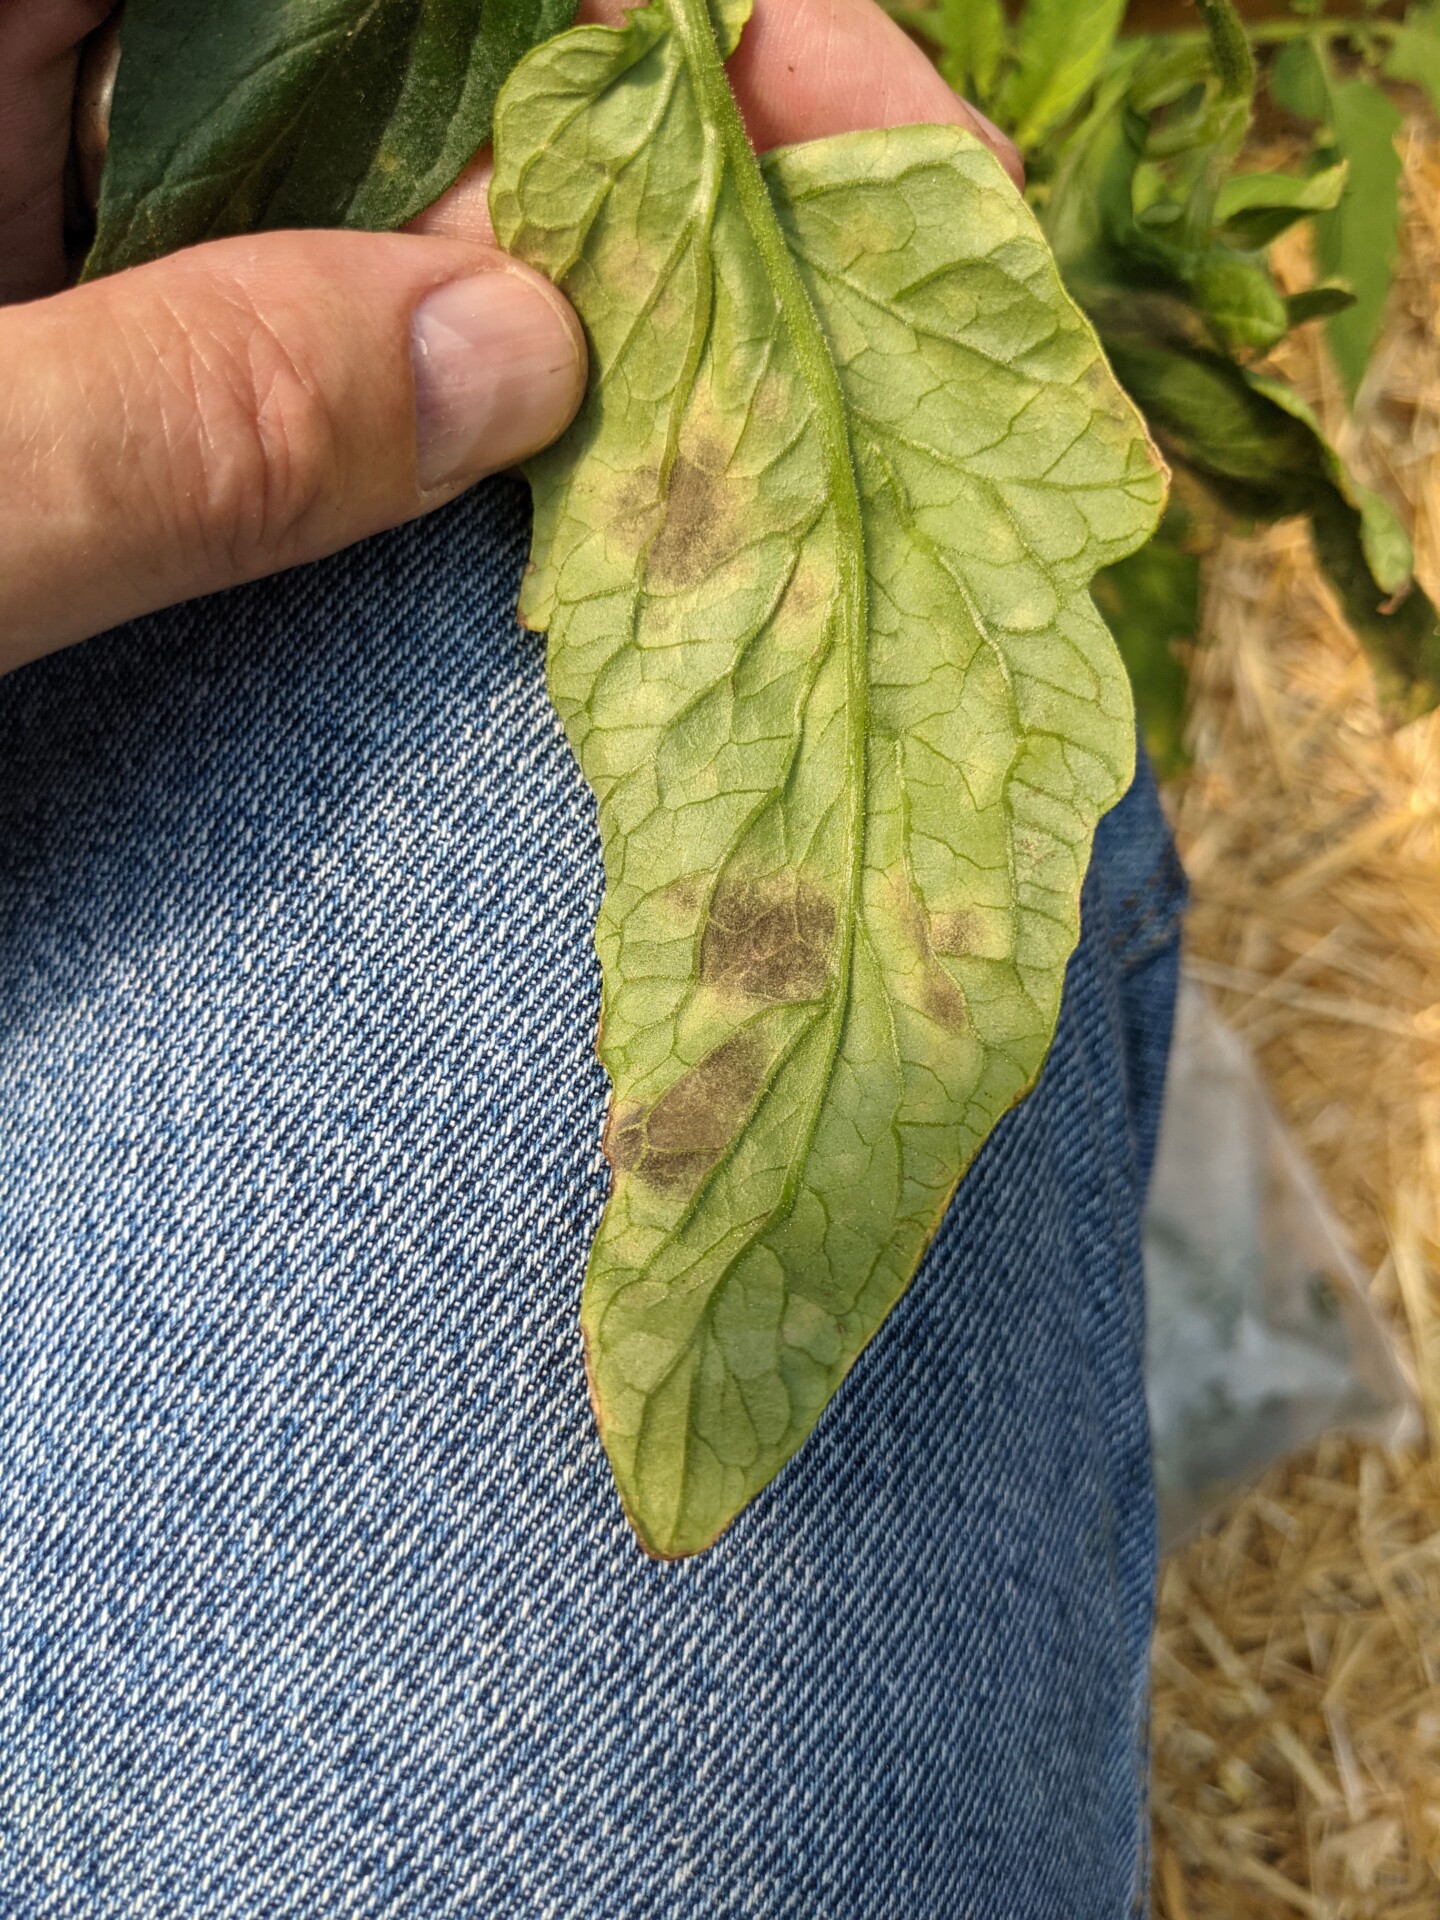 Figure 6. Another view of the dark sporulation of Cercospora leaf mold of tomato.